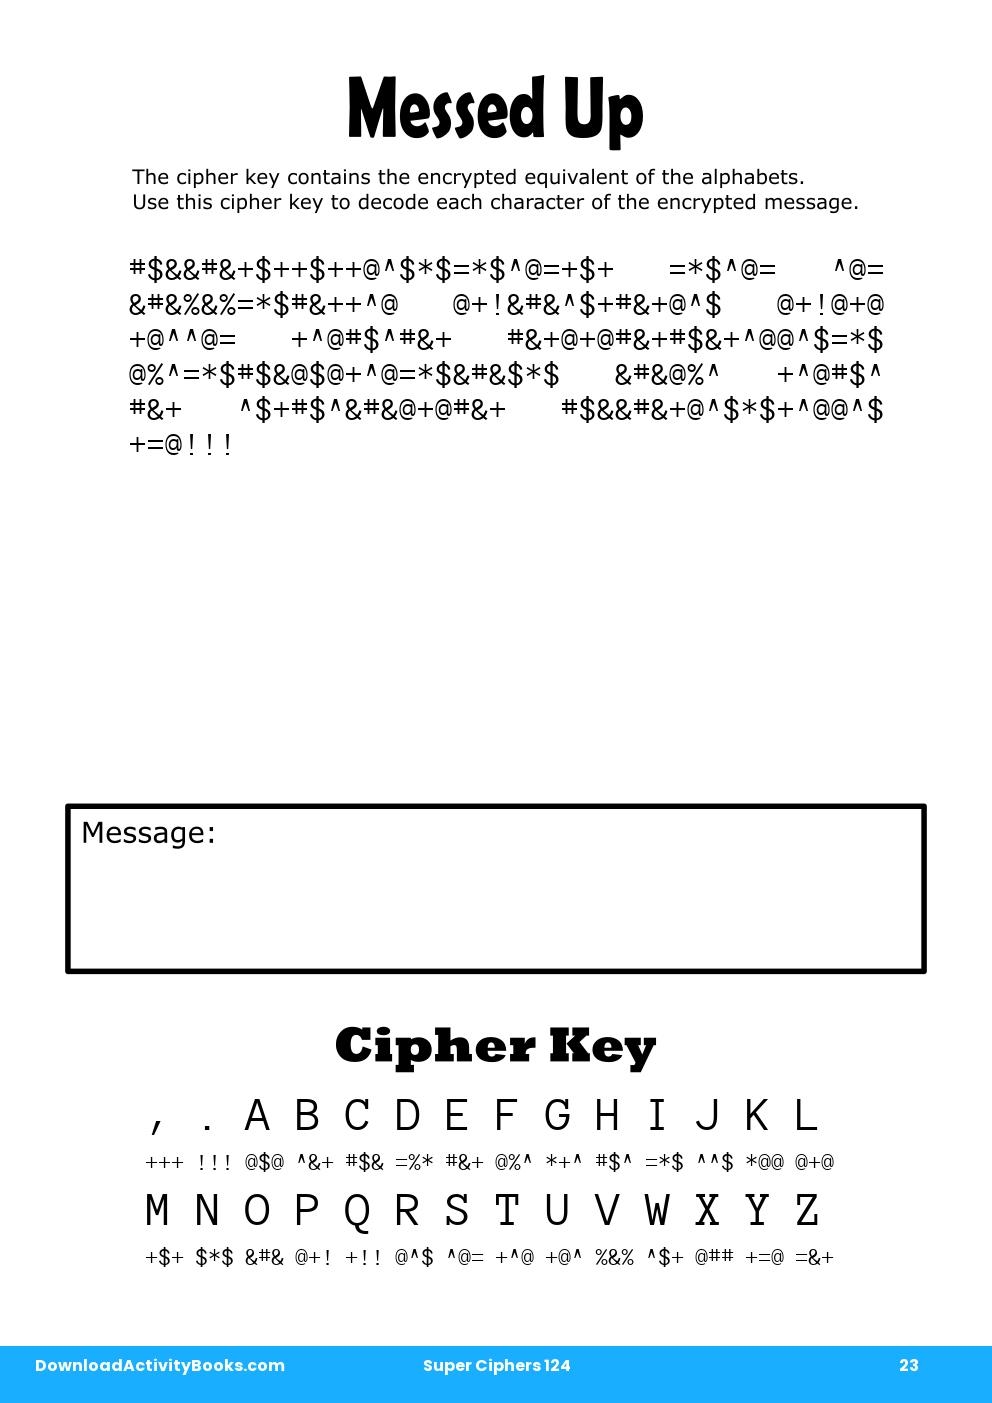 Messed Up in Super Ciphers 124